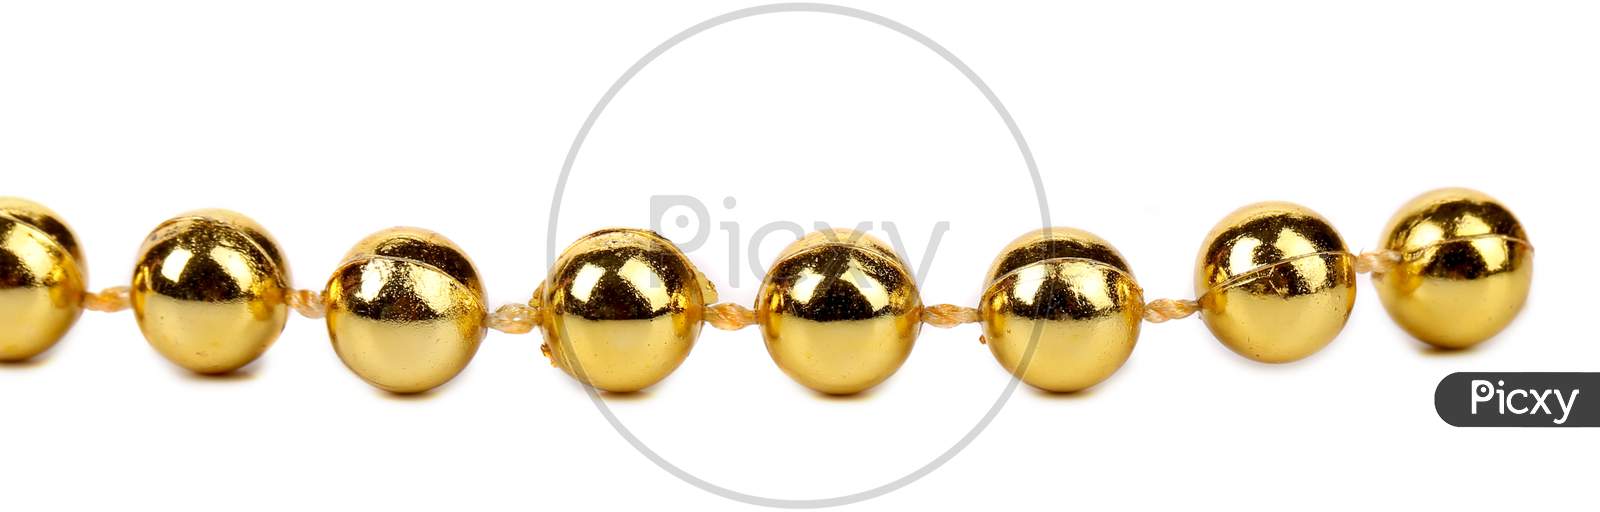 Decorative Golden Beads. Horisontal. Isolated On A White Background.